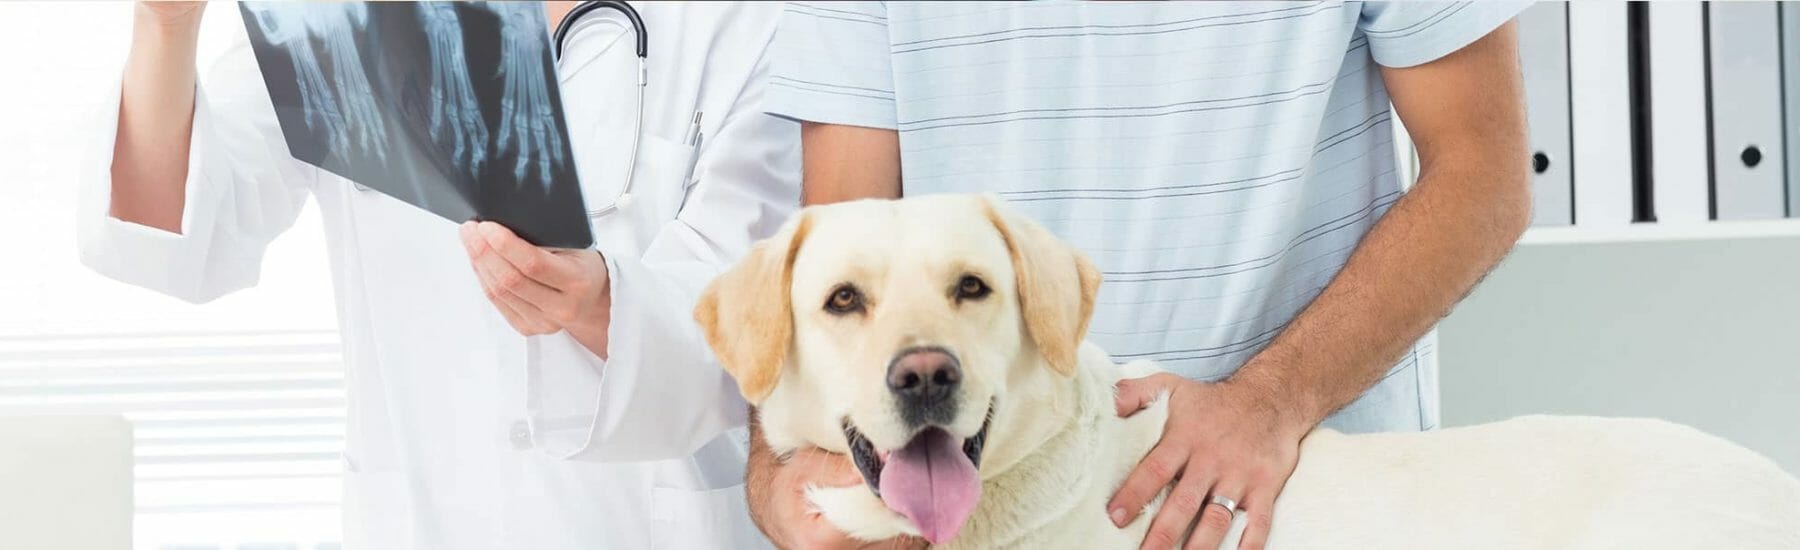 Veterinary Exams for Pets